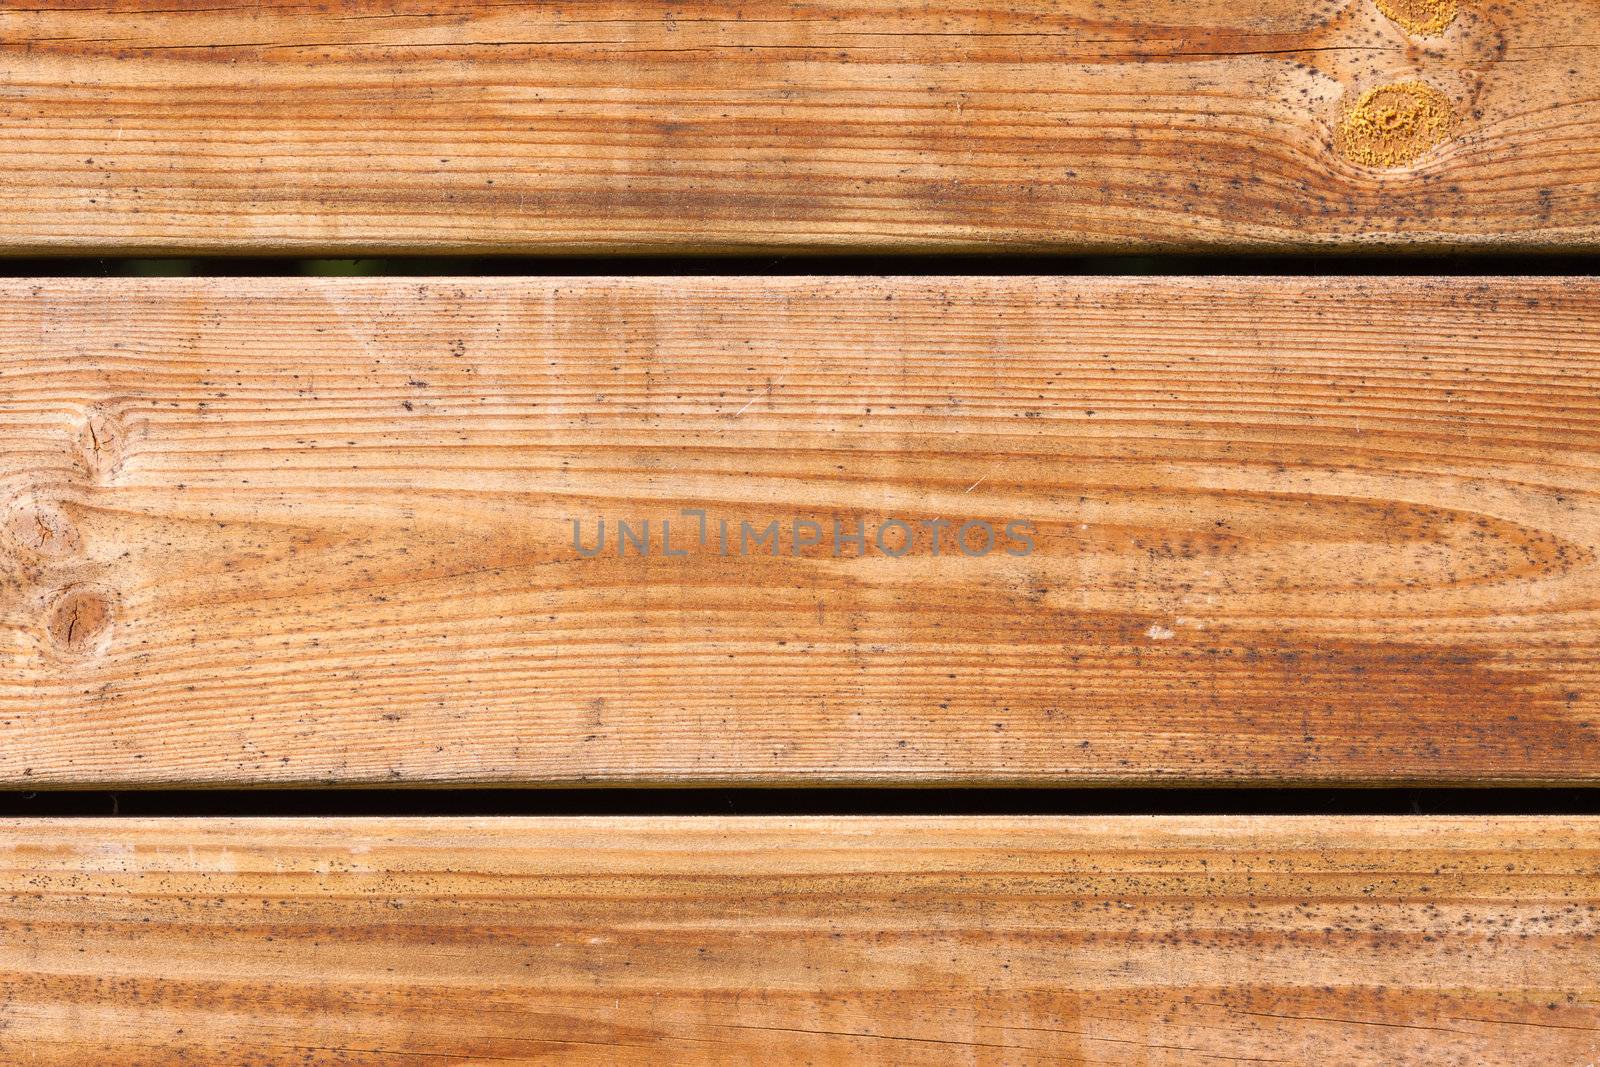 Wooden plank background or texture by Jaykayl